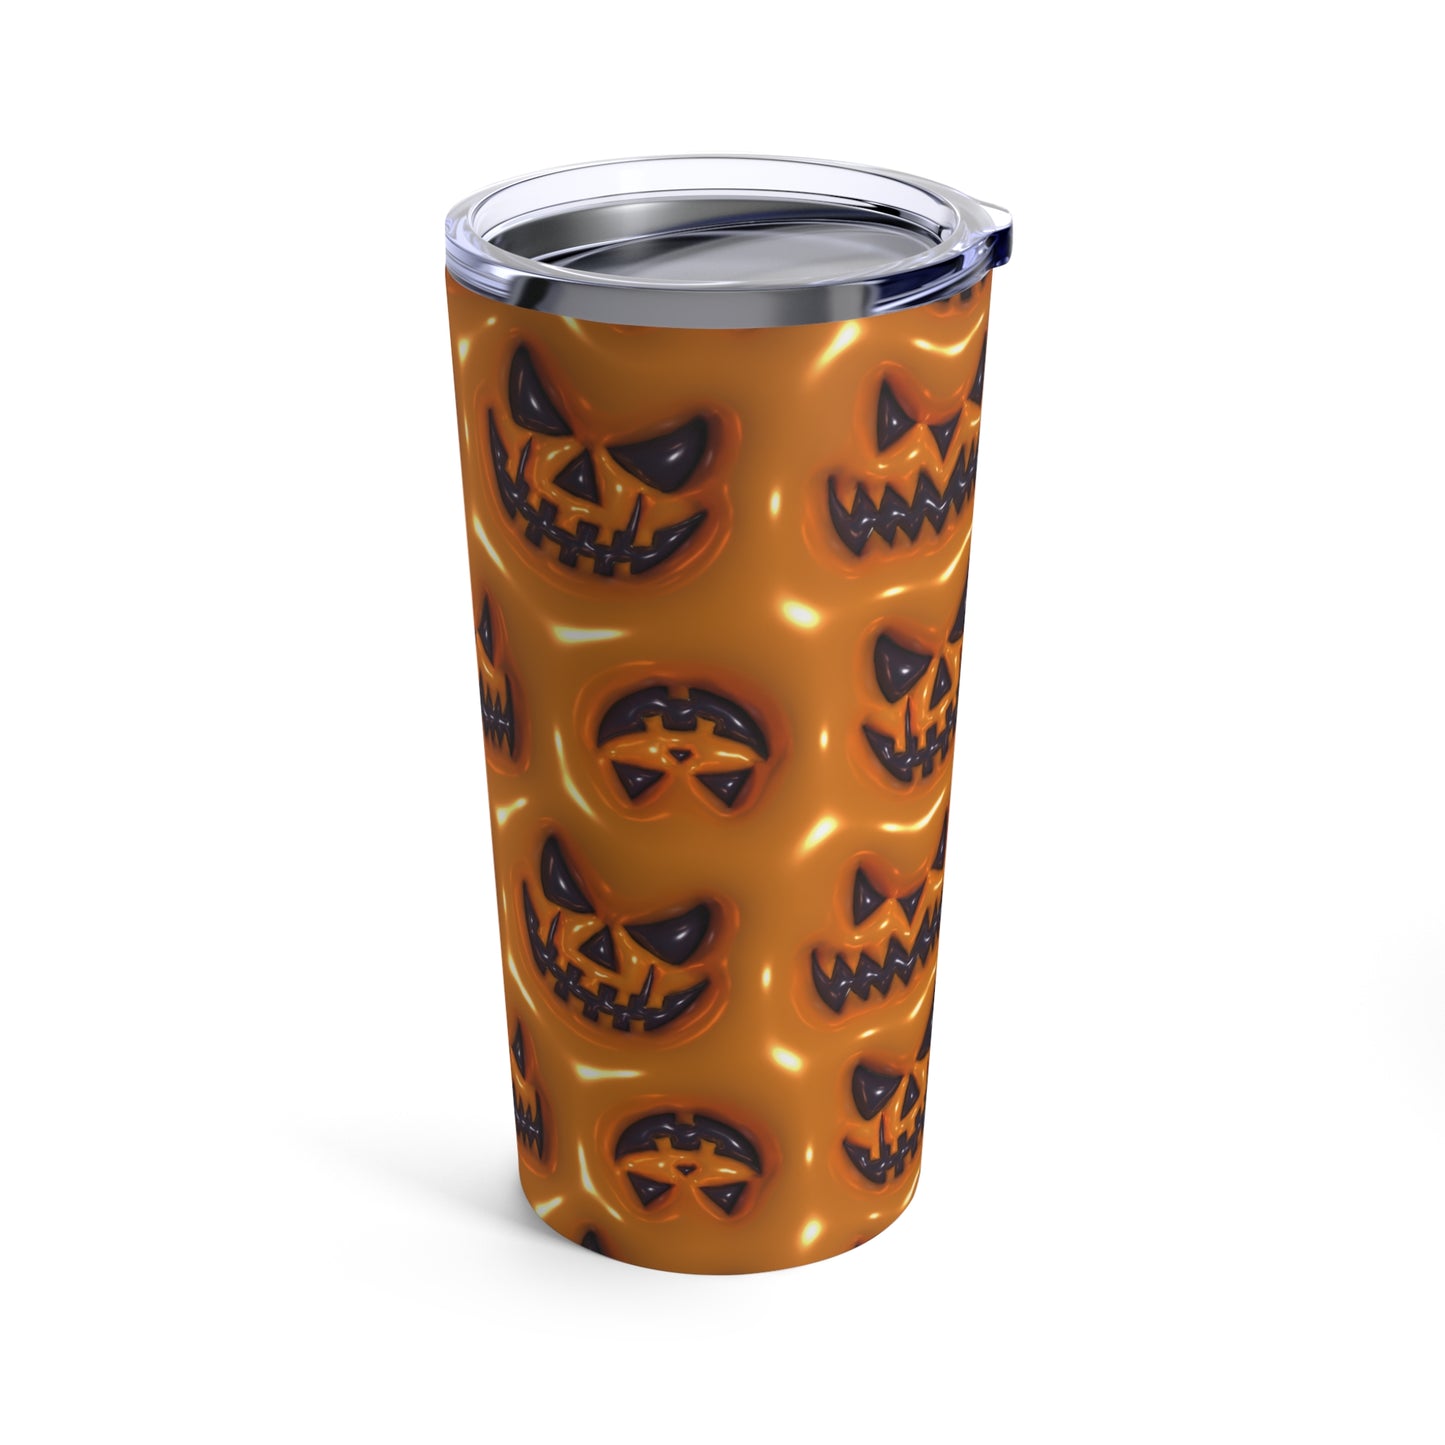 Scary Black Faced Pumpkin Faces With Orange Background 3-D Puffy Halloween by  Mulew Art Tumbler 20oz